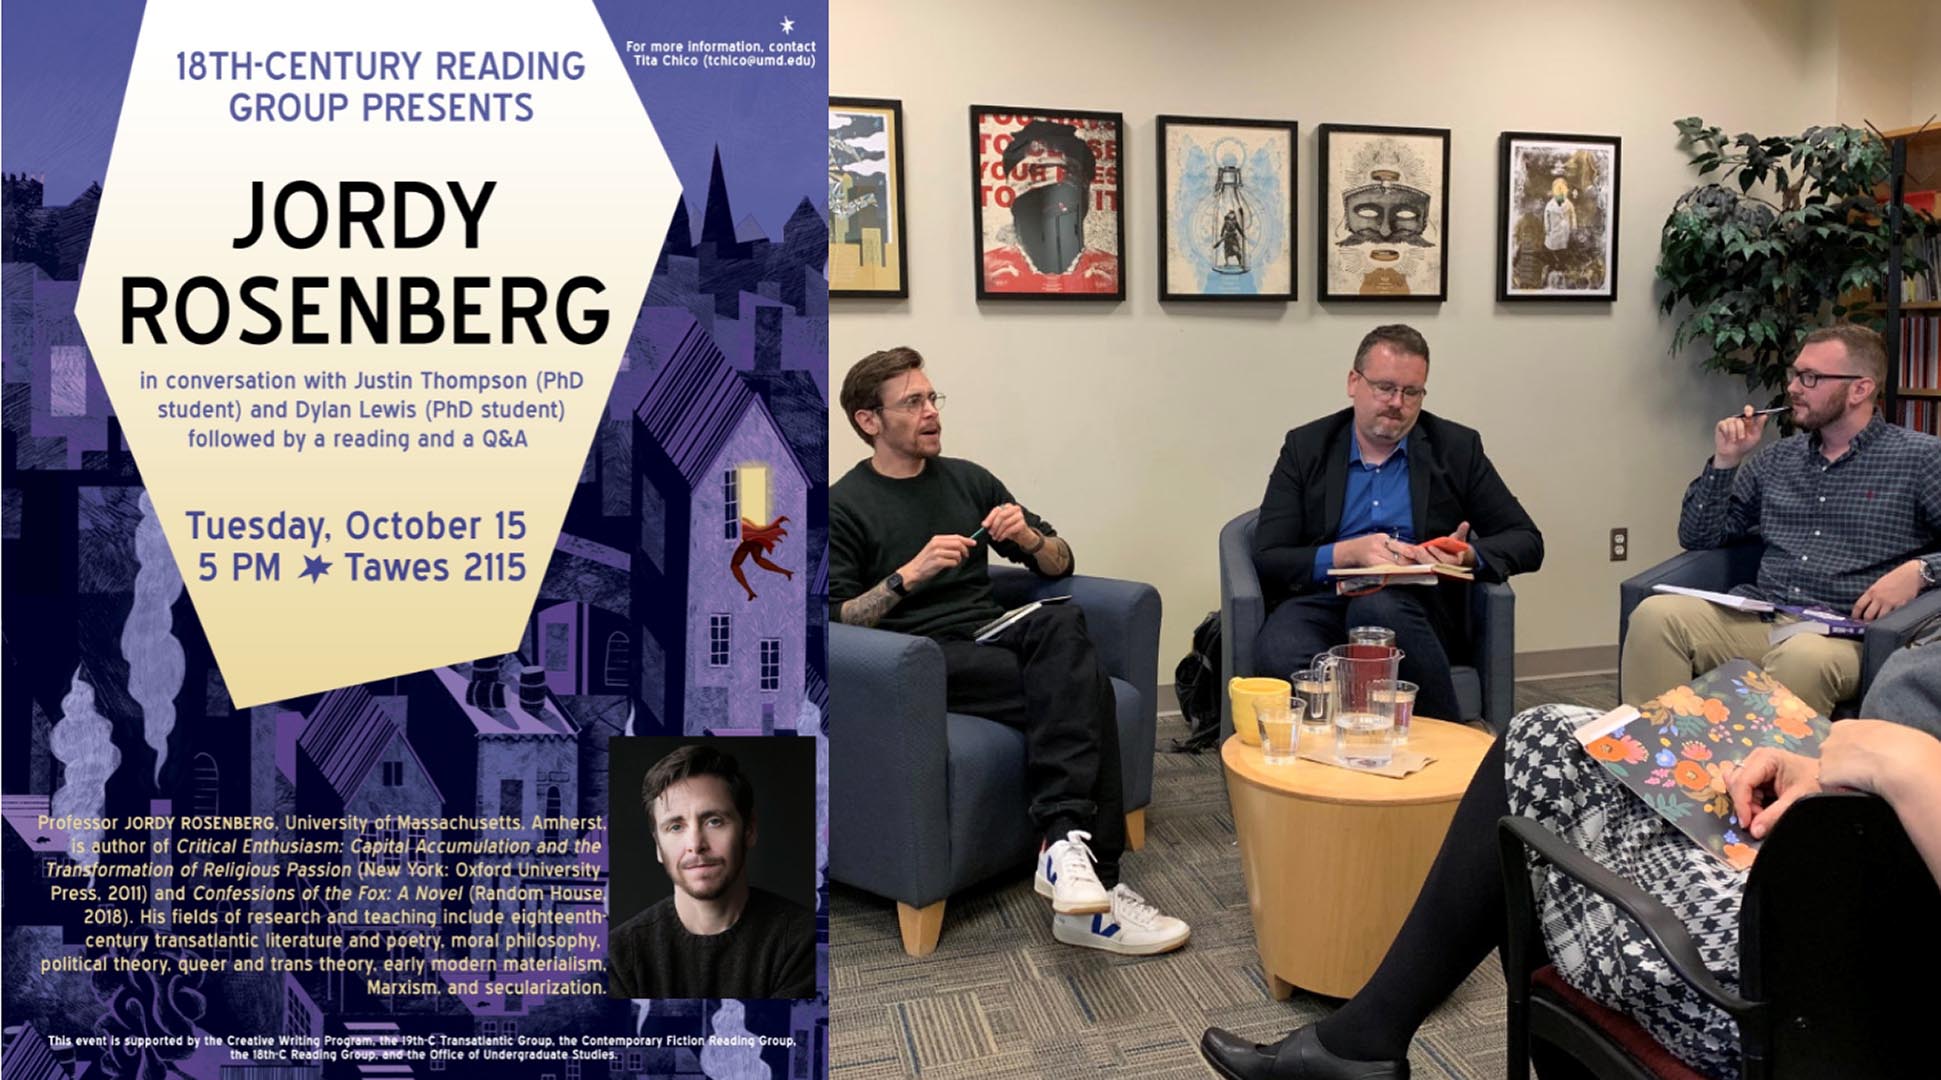 Image: Dylan Lewis (right) and Justin Thompson (center) lead discussion with author Jordy Rosenberg